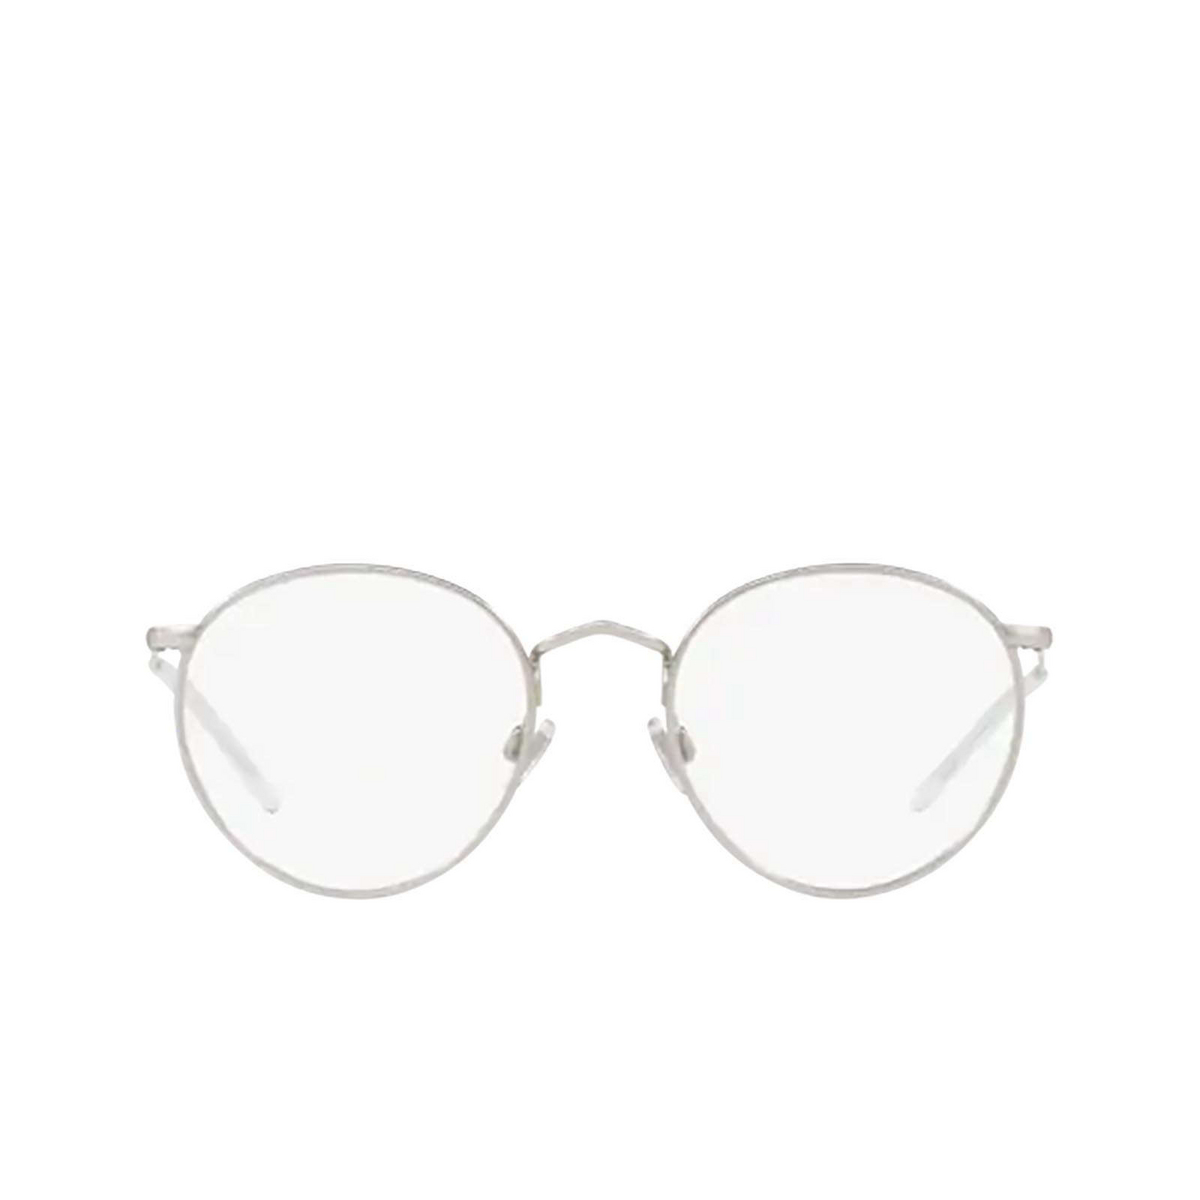 Polo Ralph Lauren® Round Eyeglasses: PH1179 color Semi-shiny Brushed Silver 9326 - 1/3.